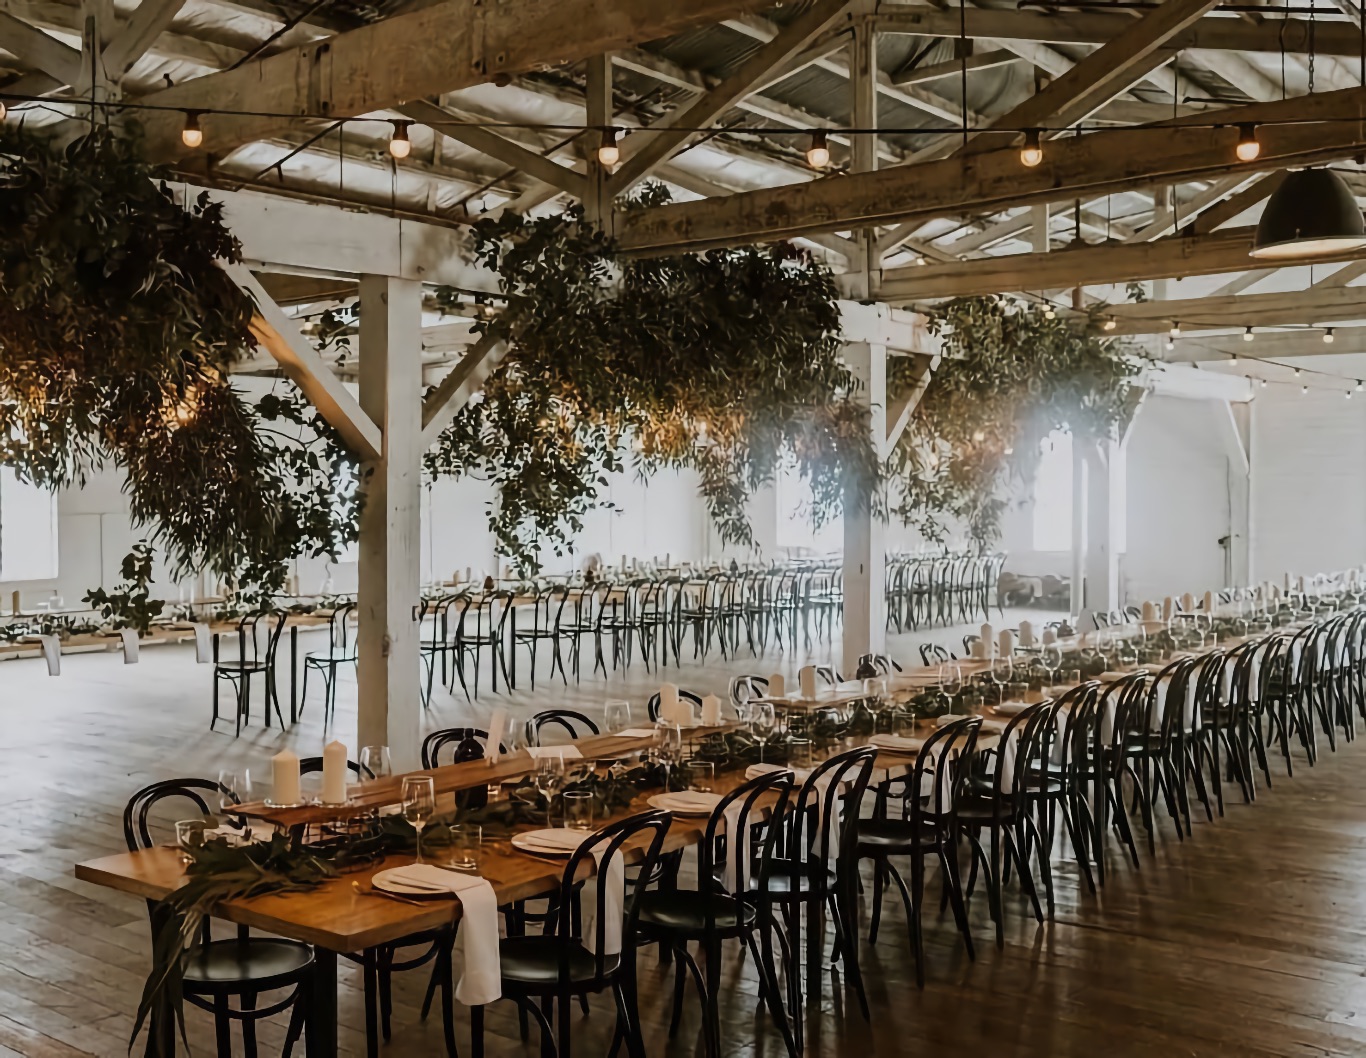 Wedding tables set in a warehouse space.